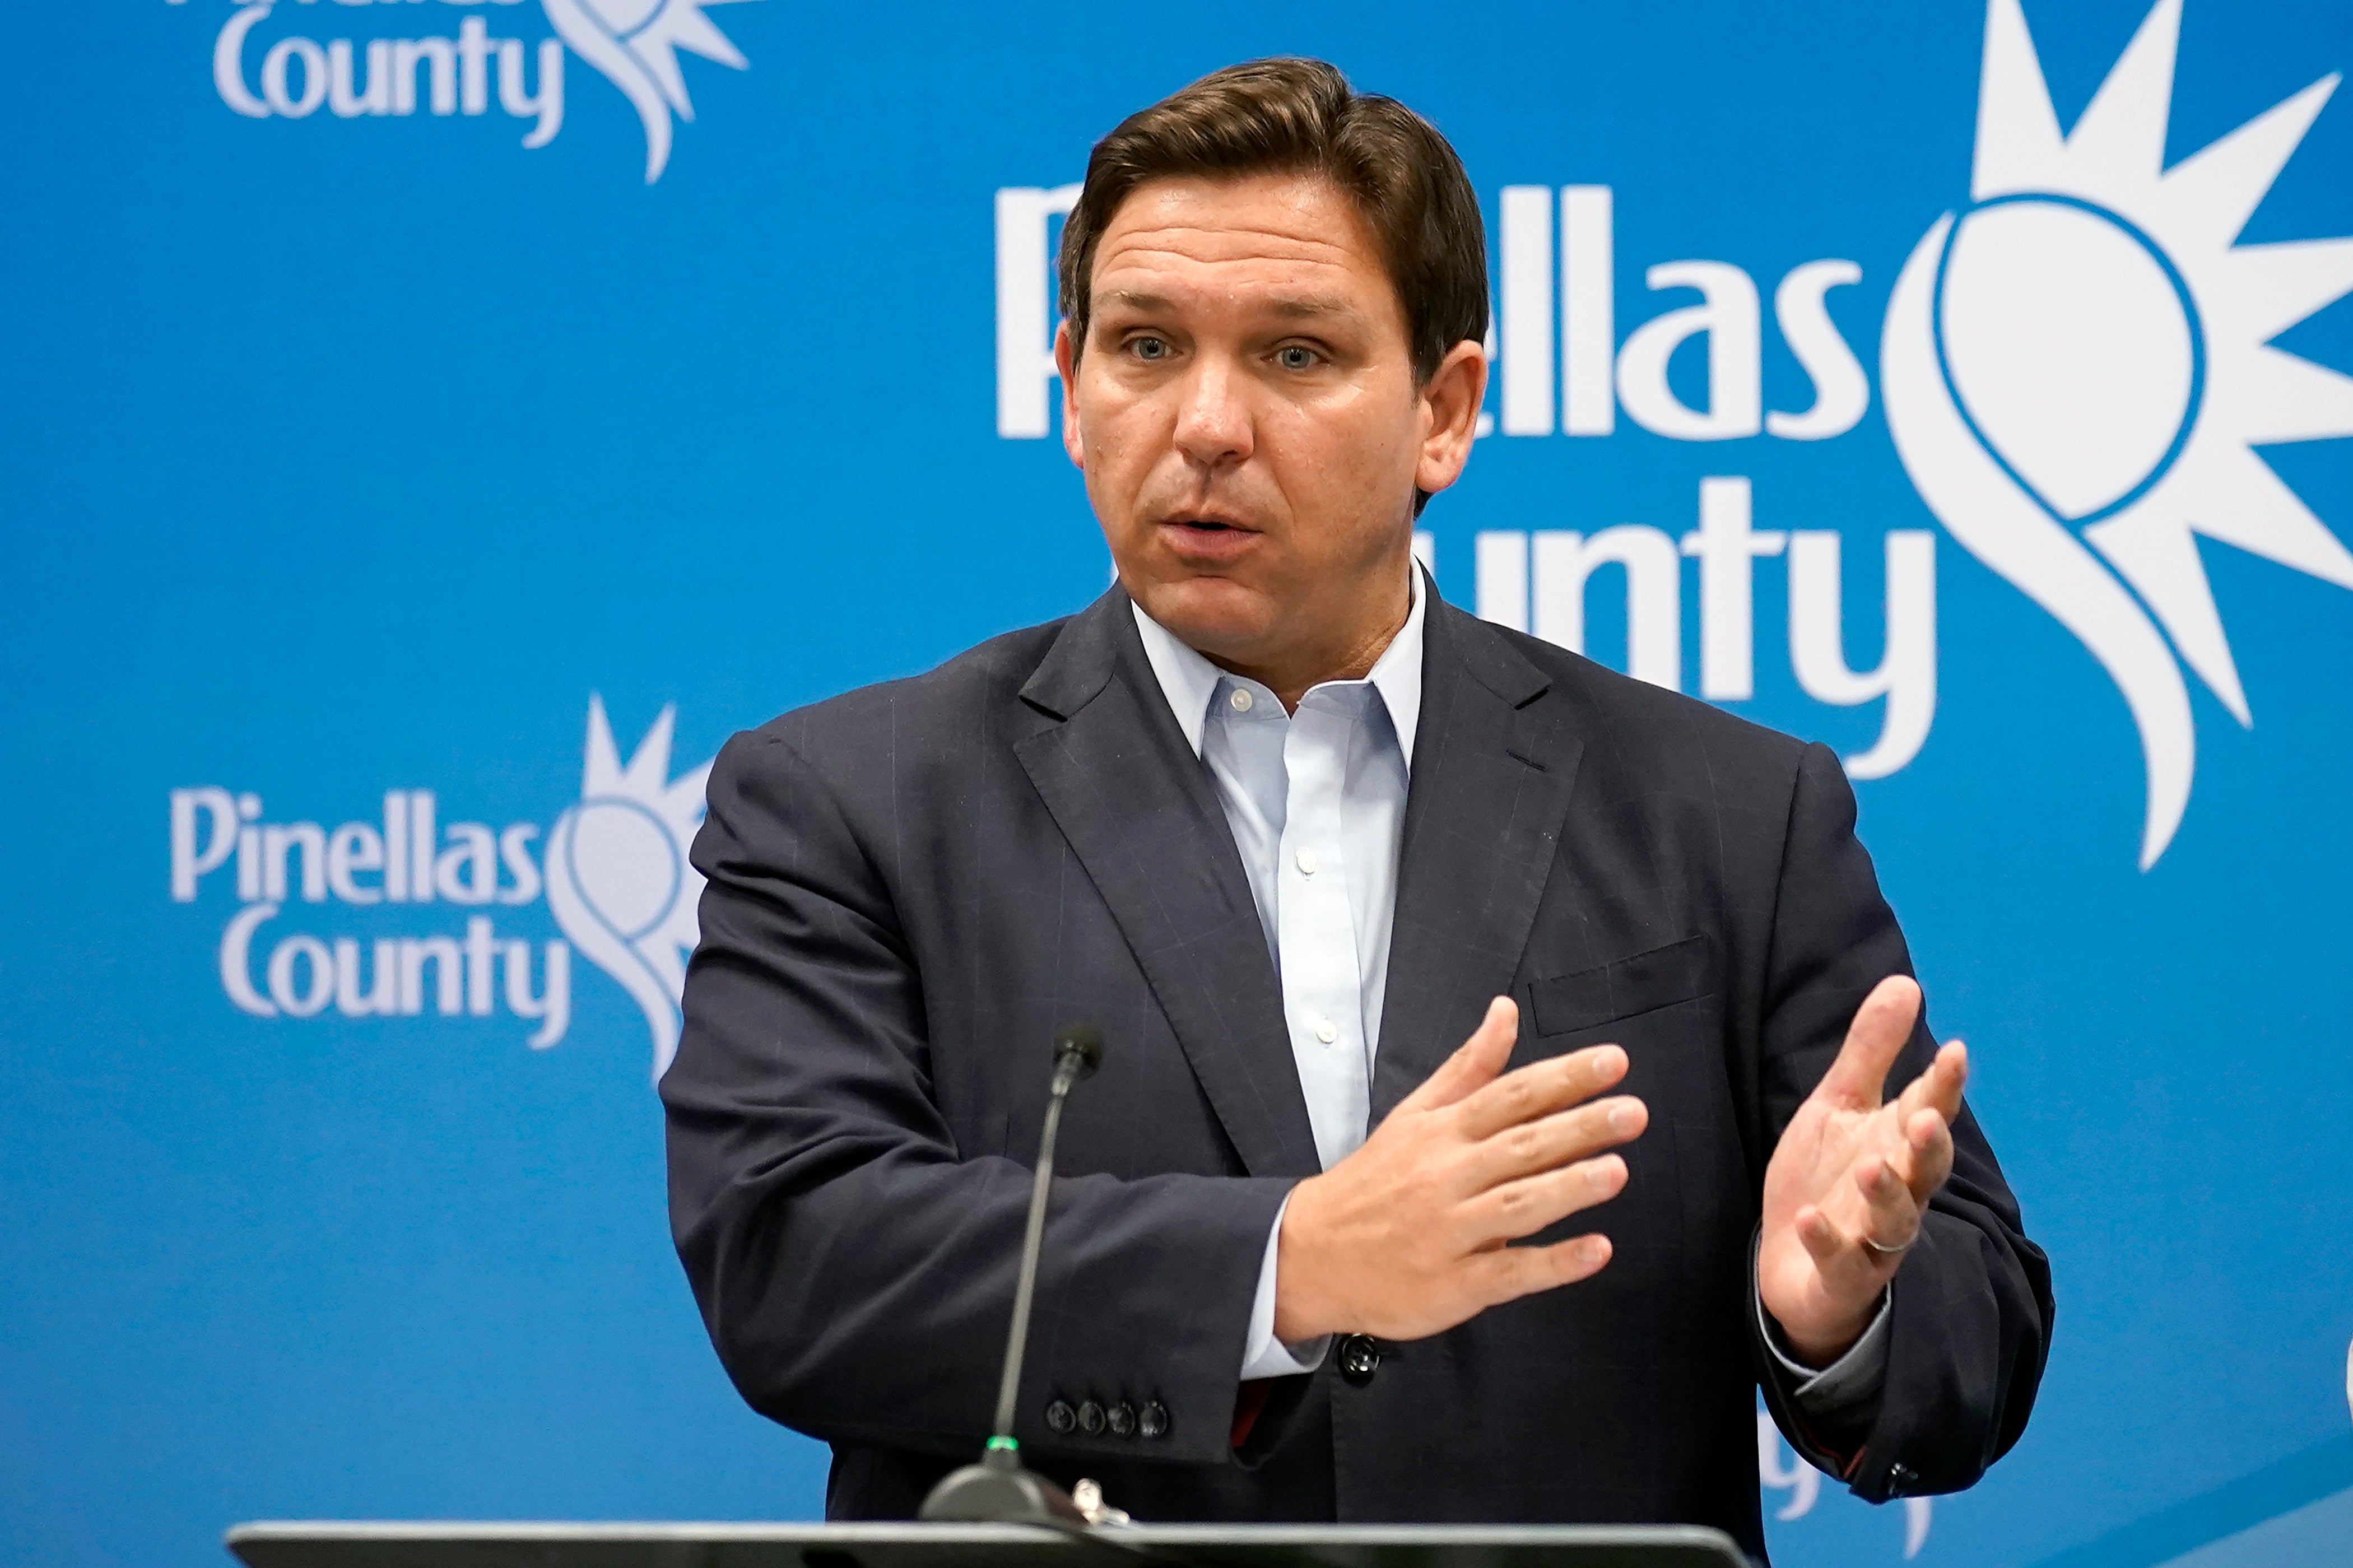 Florida governor Ron DeSantis was left on his own to coordinate a response he clearly wasn’t equipped for, and now he’s taking the flak